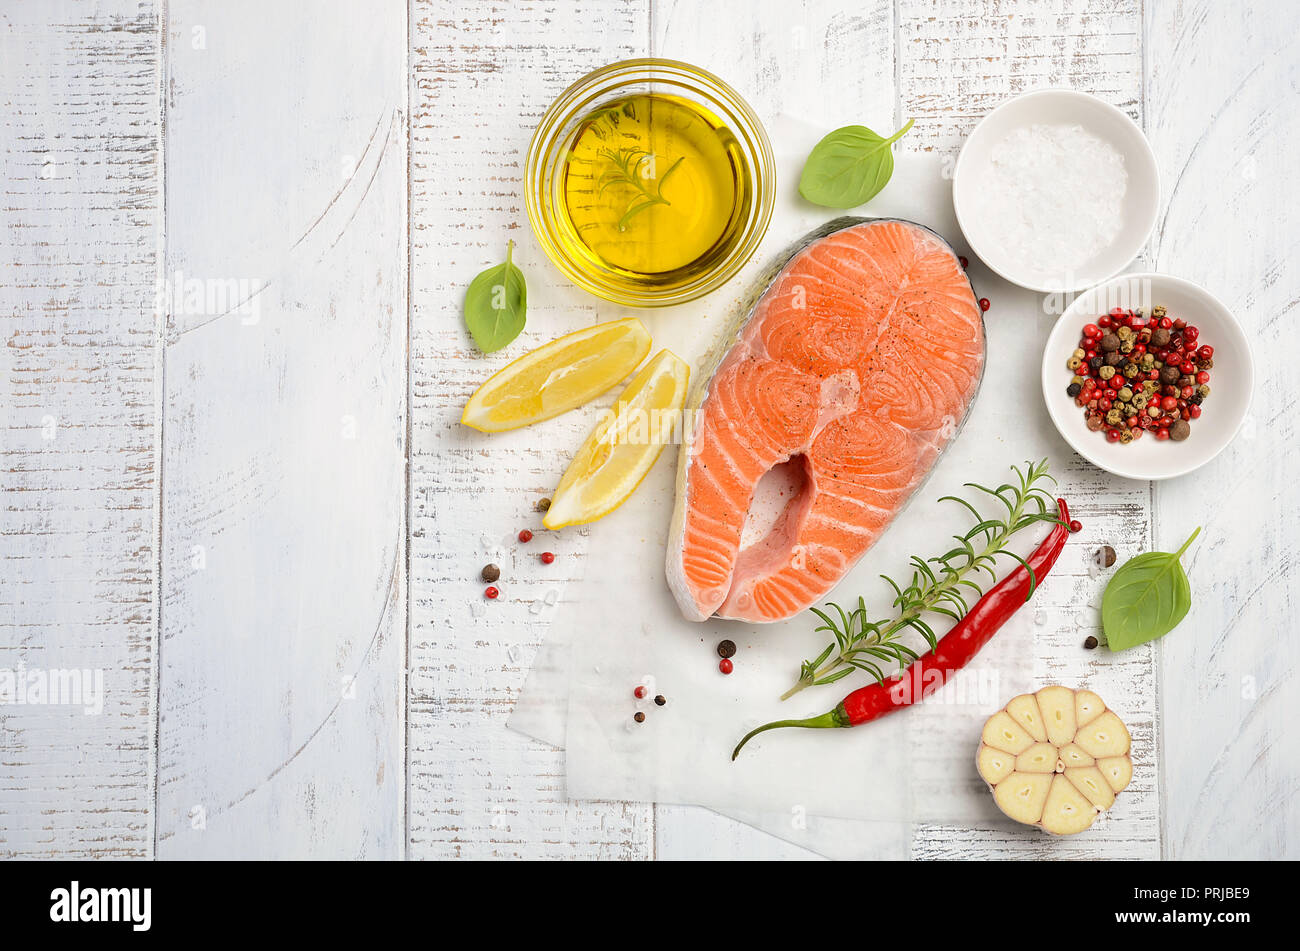 Fresh raw salmon steak with lemon, olive oil and spices on rustic wooden background. Ingredients for making healthy dinner. Healthy diet concept. Stock Photo